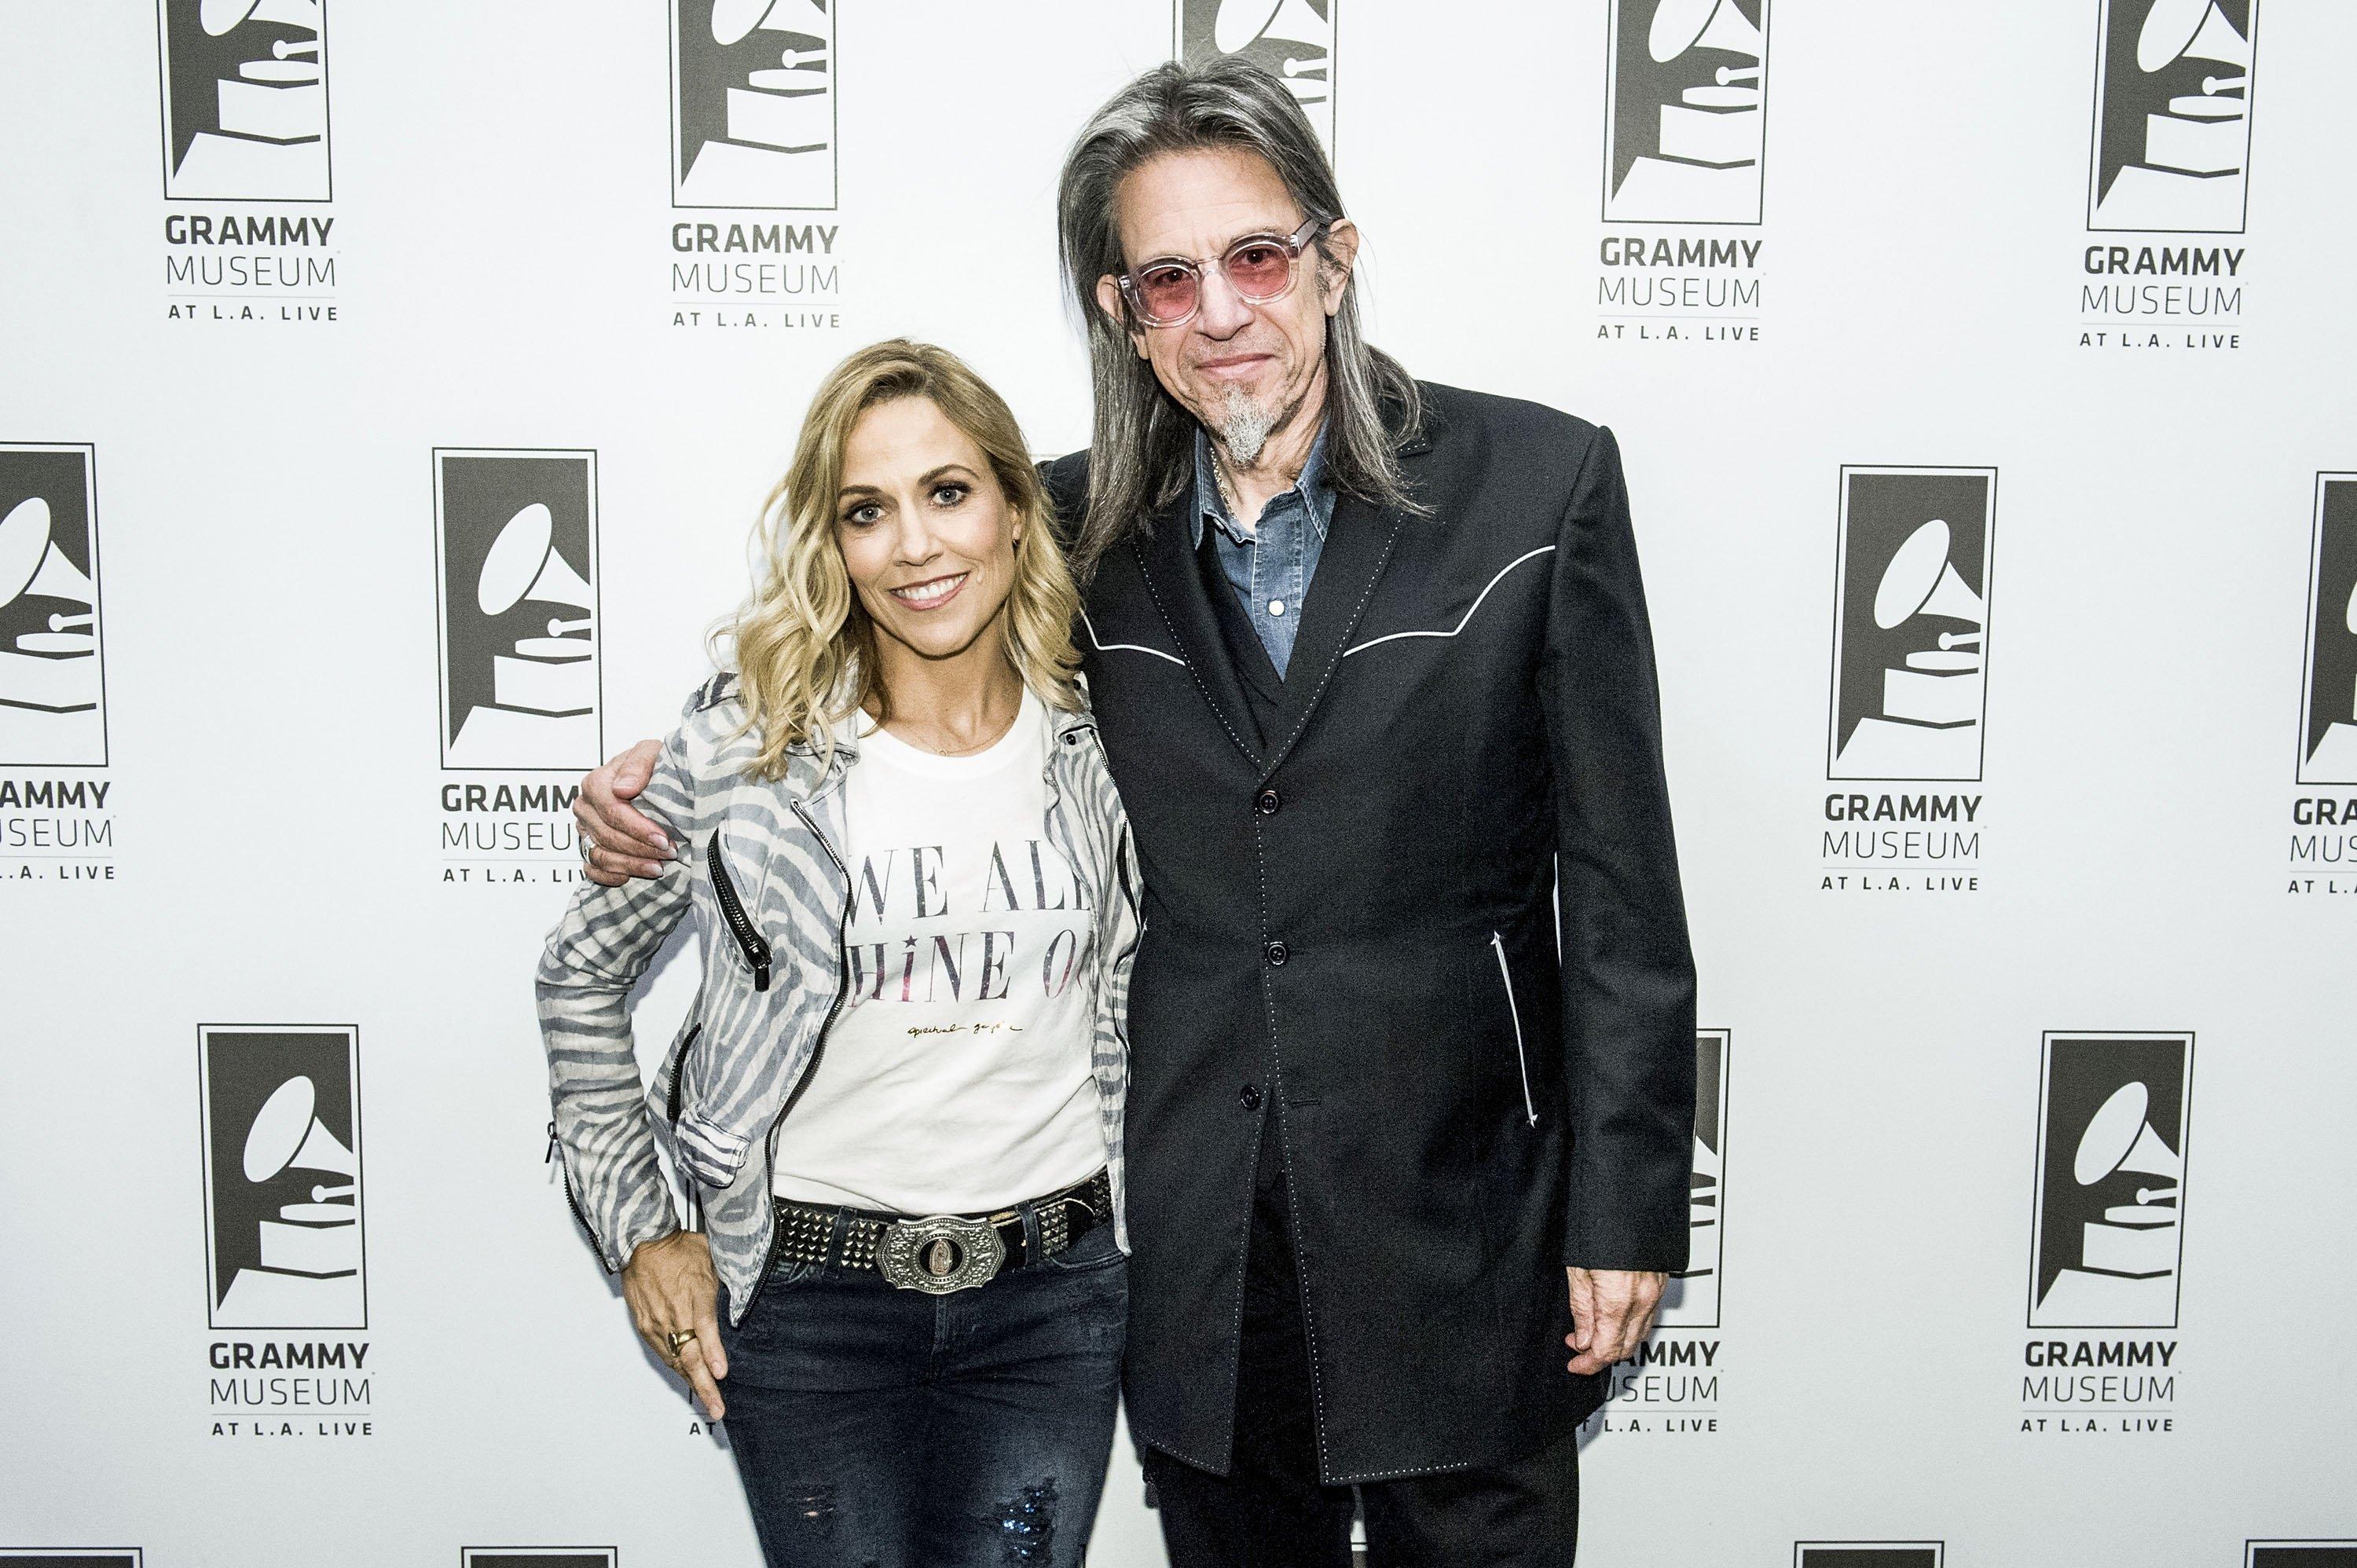 Sheryl Crow and Scott Goldman at the GRAMMY Museum